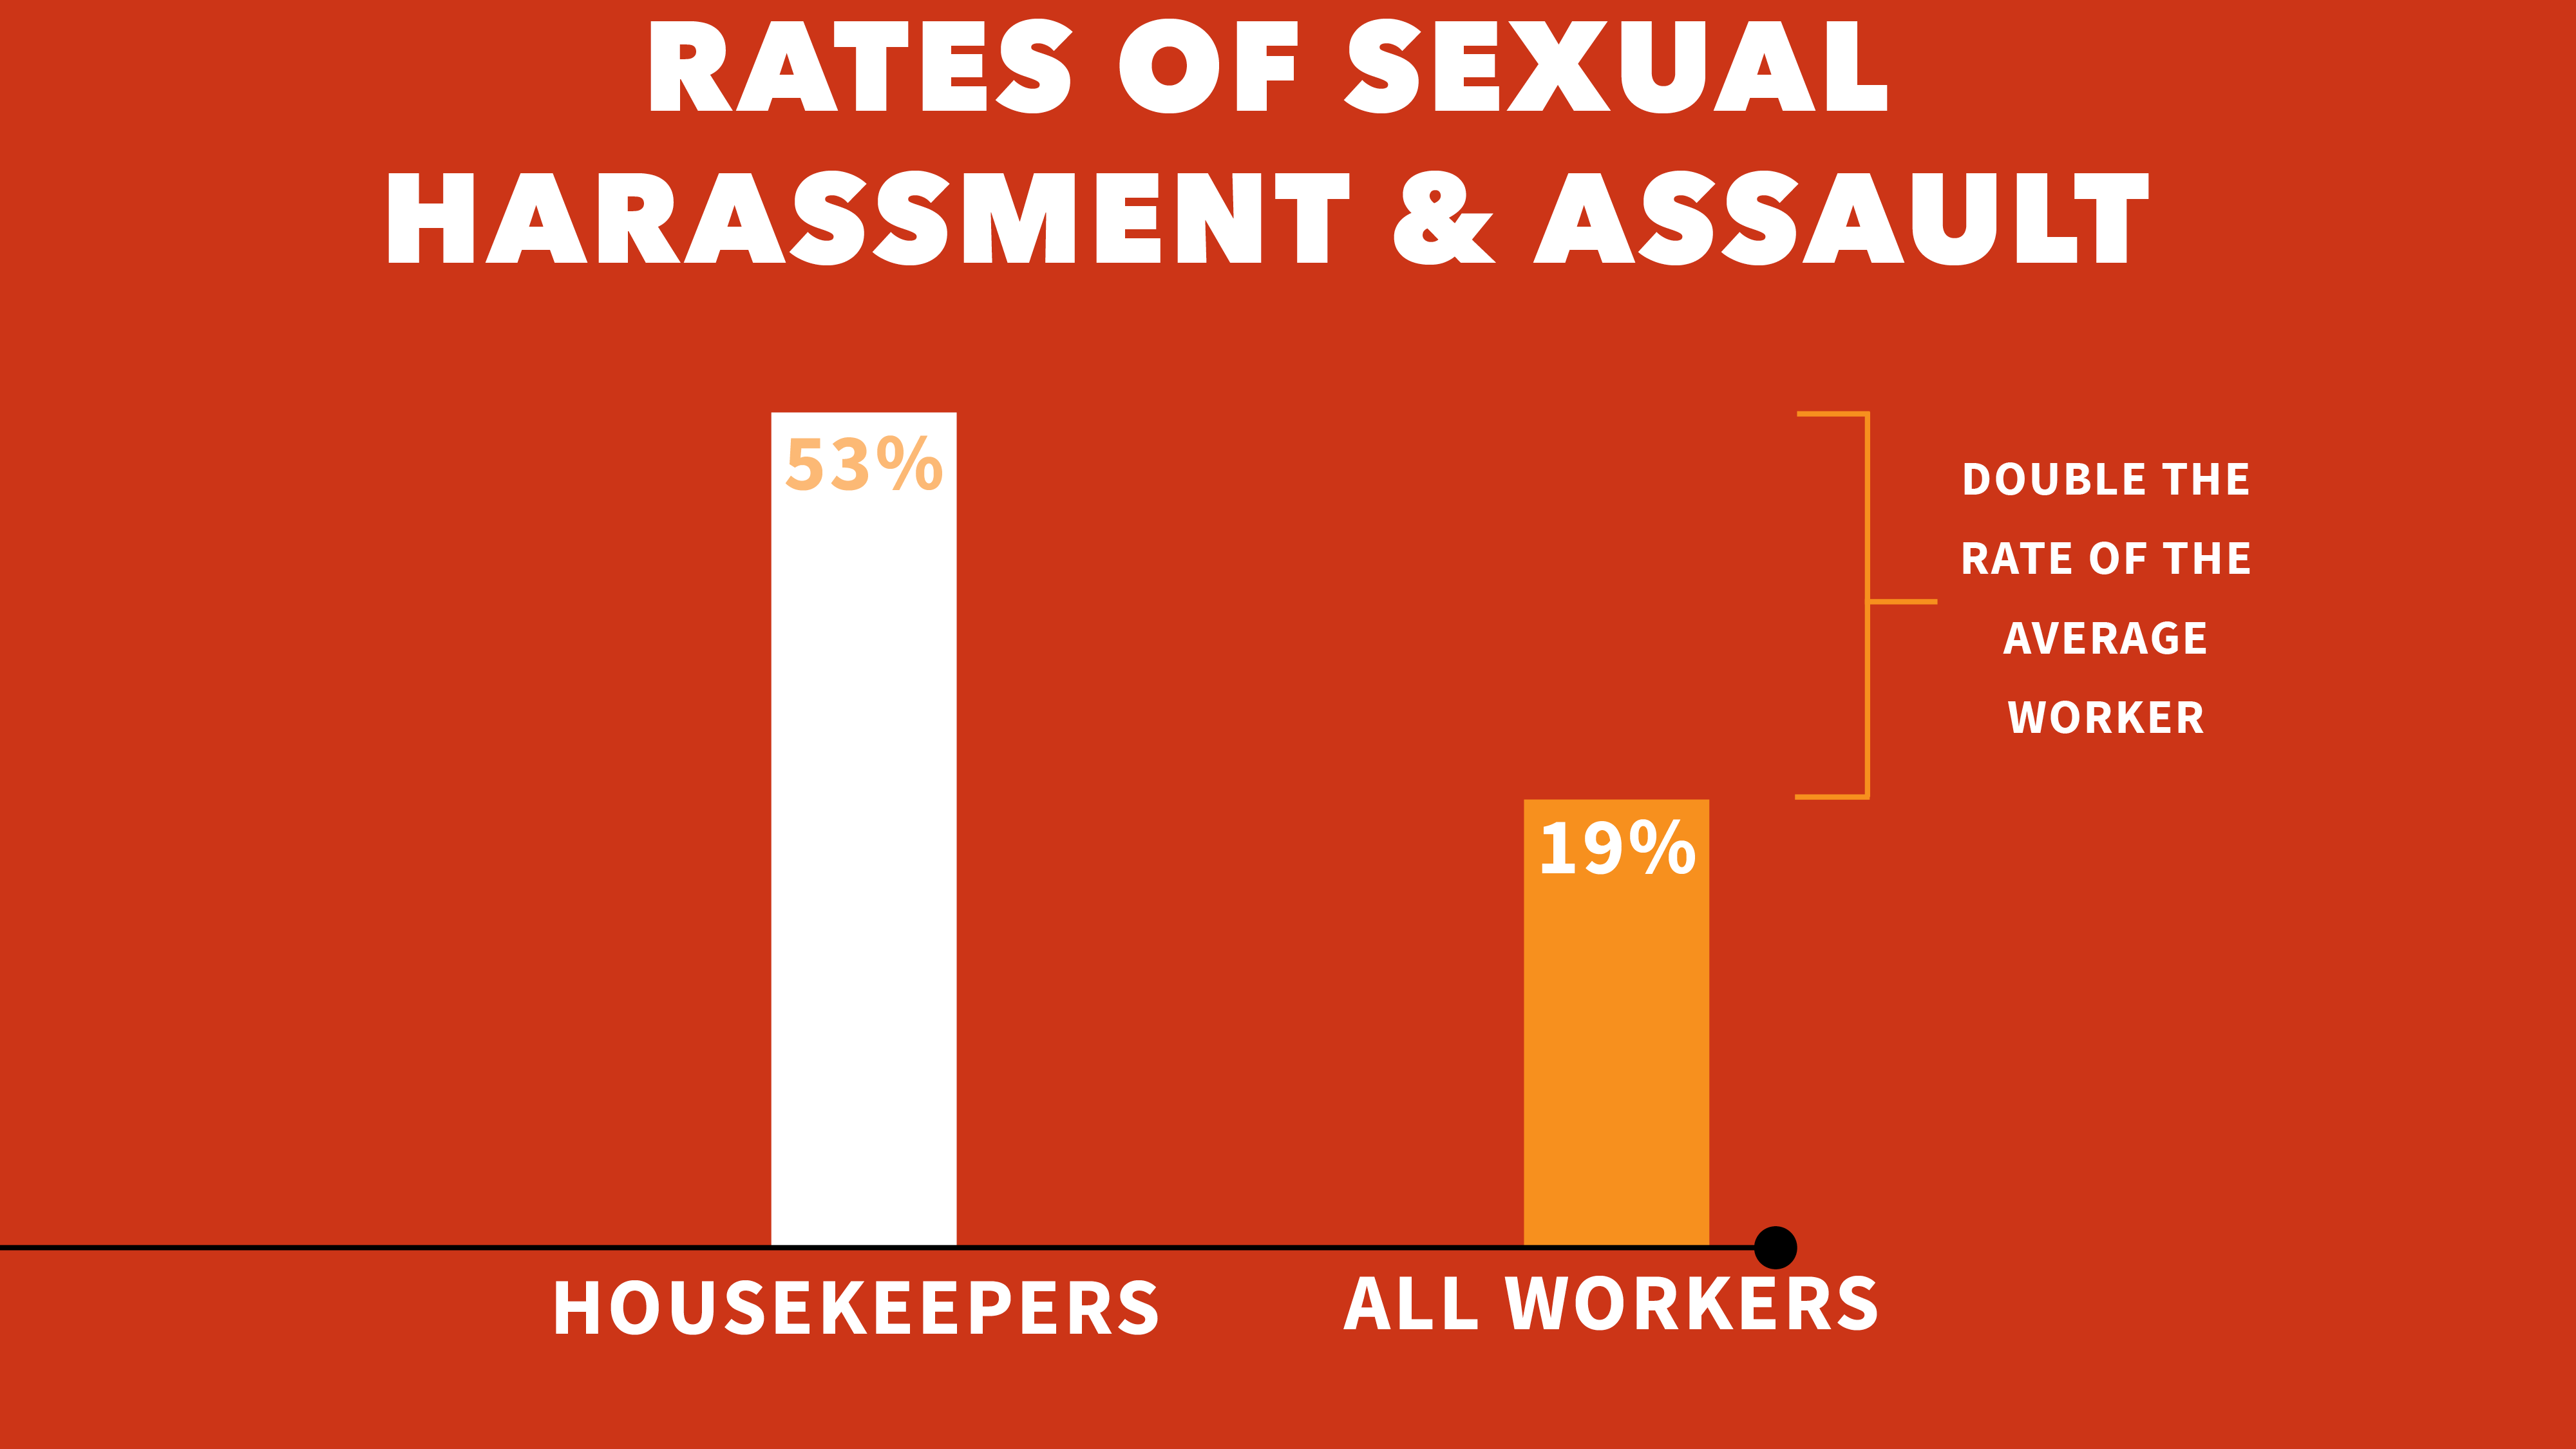 Graph of higher rates of sexual harassment reported by housekeepers